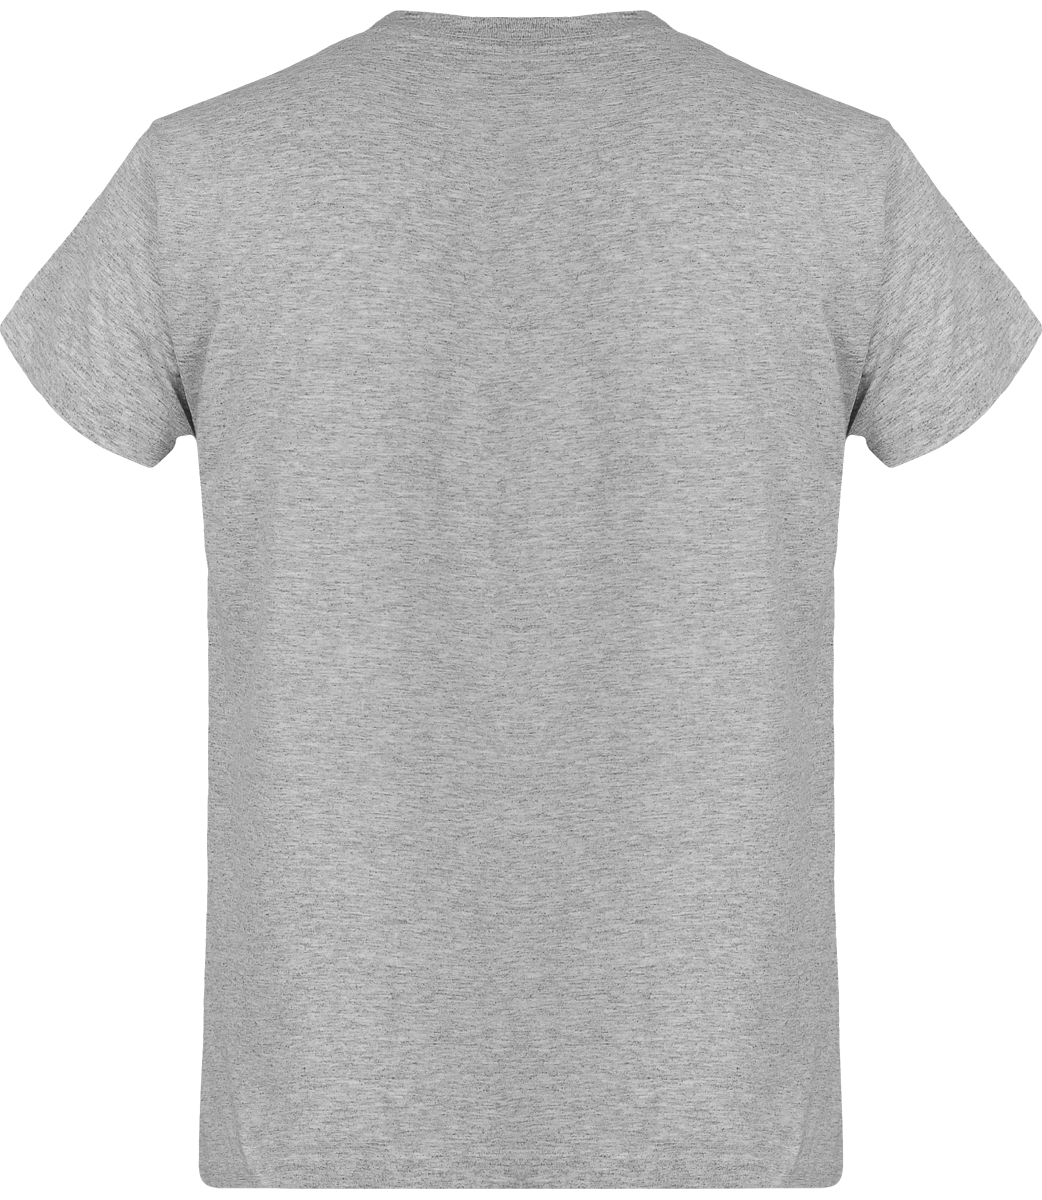 Basic Cotton T-Shirt For Men Ideal For Customization Heather Grey